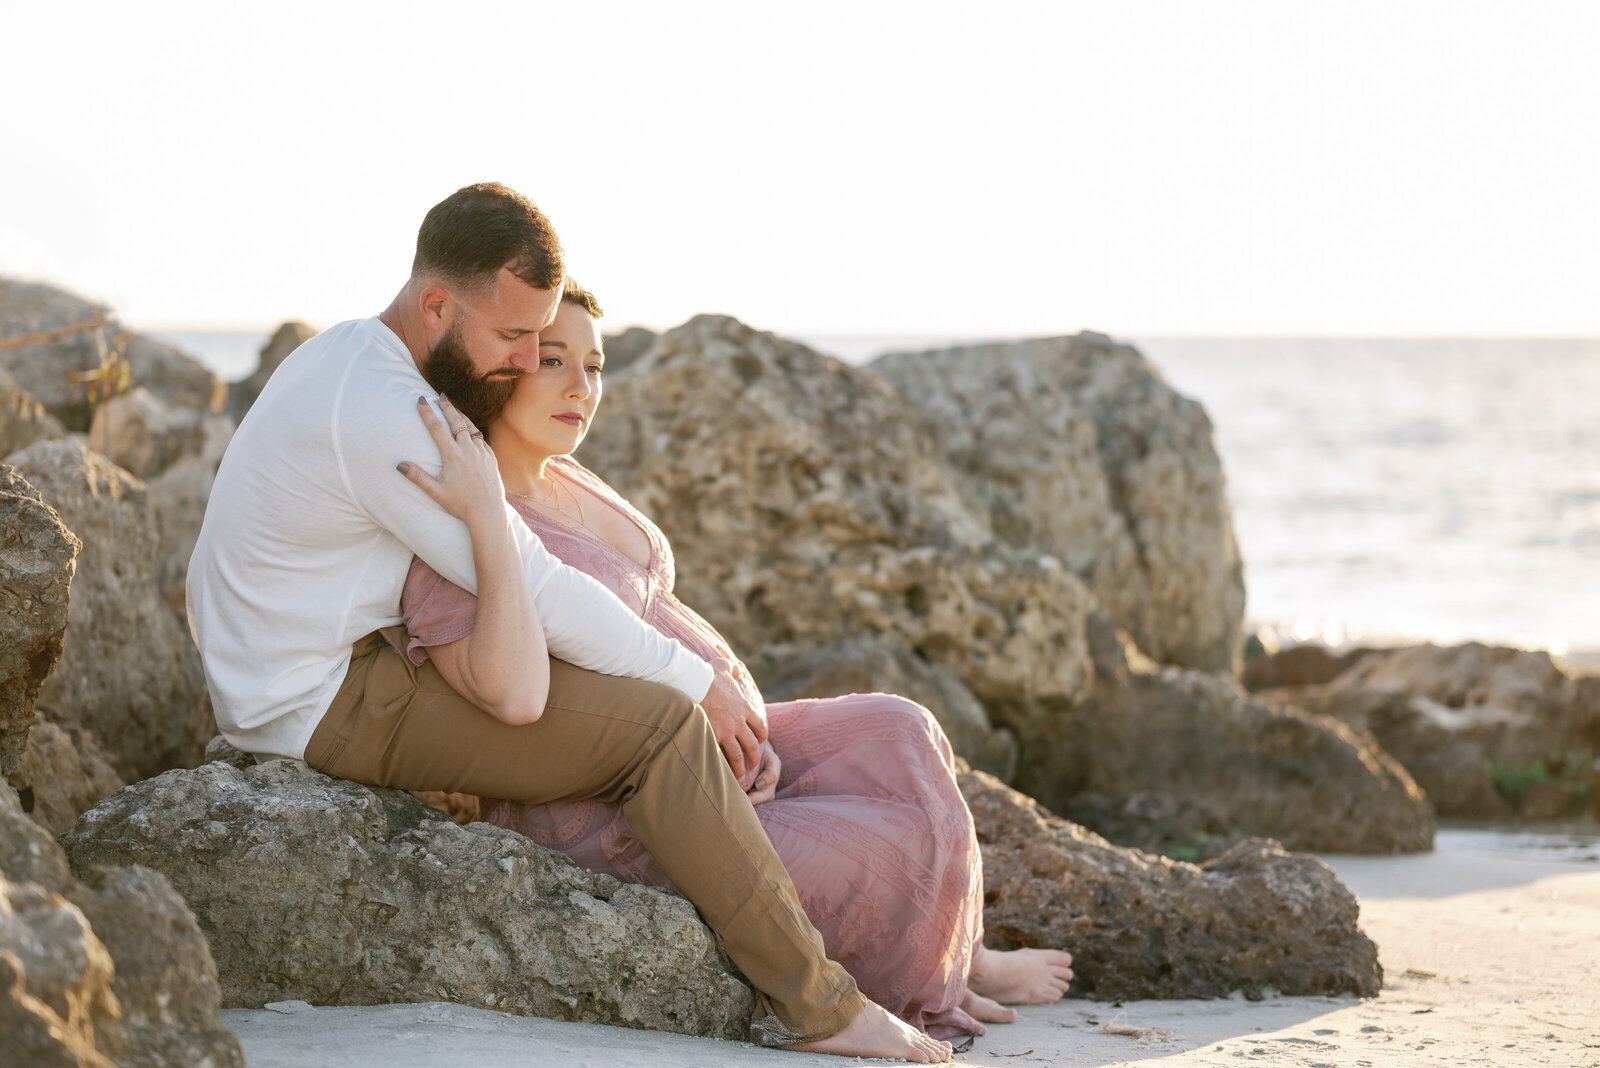 Pregnant woman snuggling with her husband on a rock jetty near the waterline of a beach